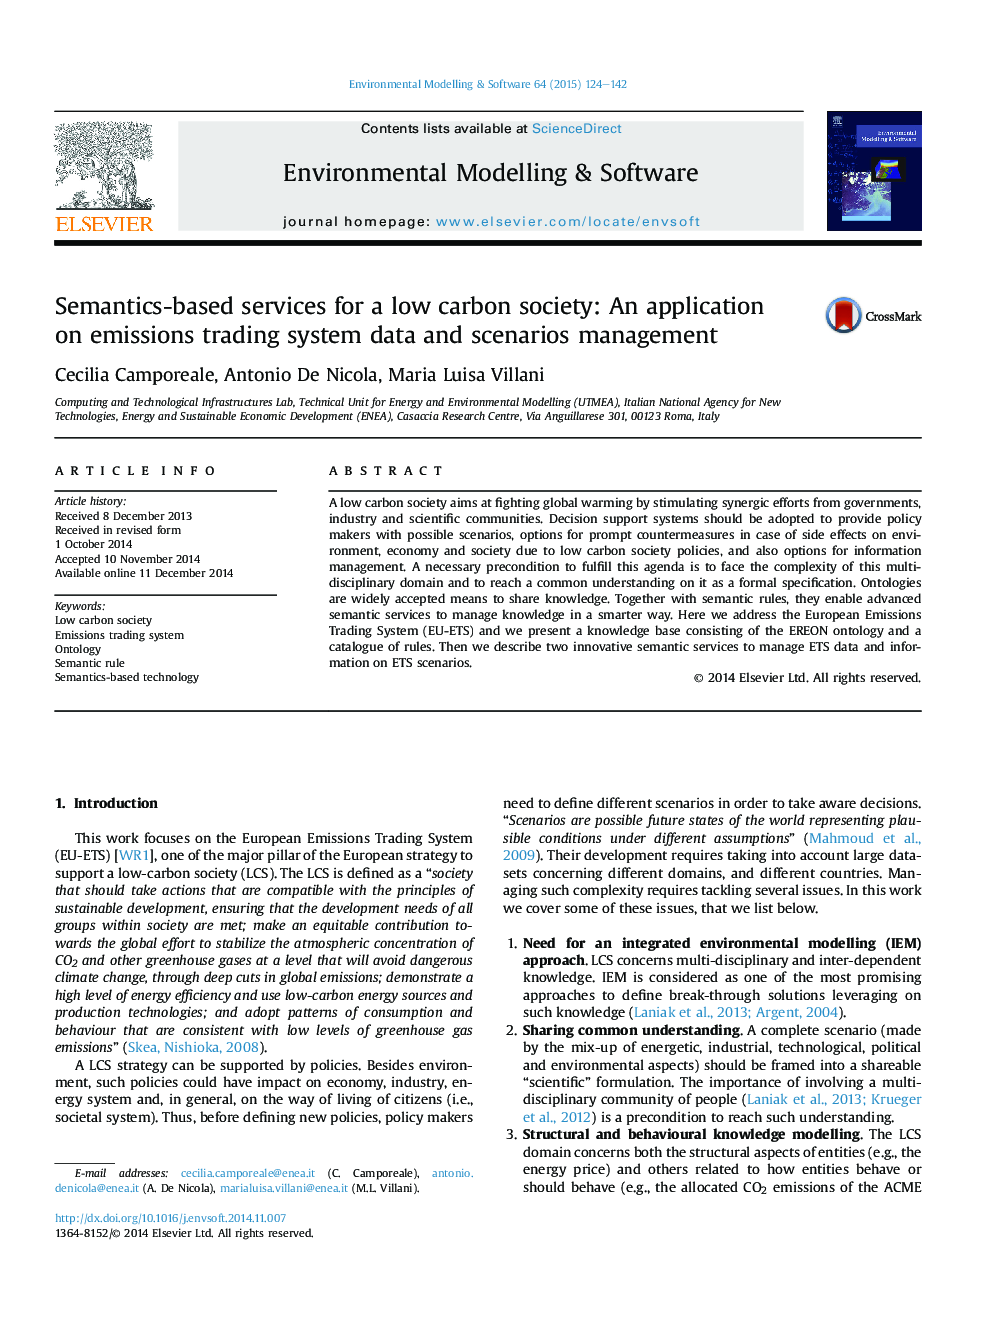 Semantics-based services for a low carbon society: An application on emissions trading system data and scenarios management